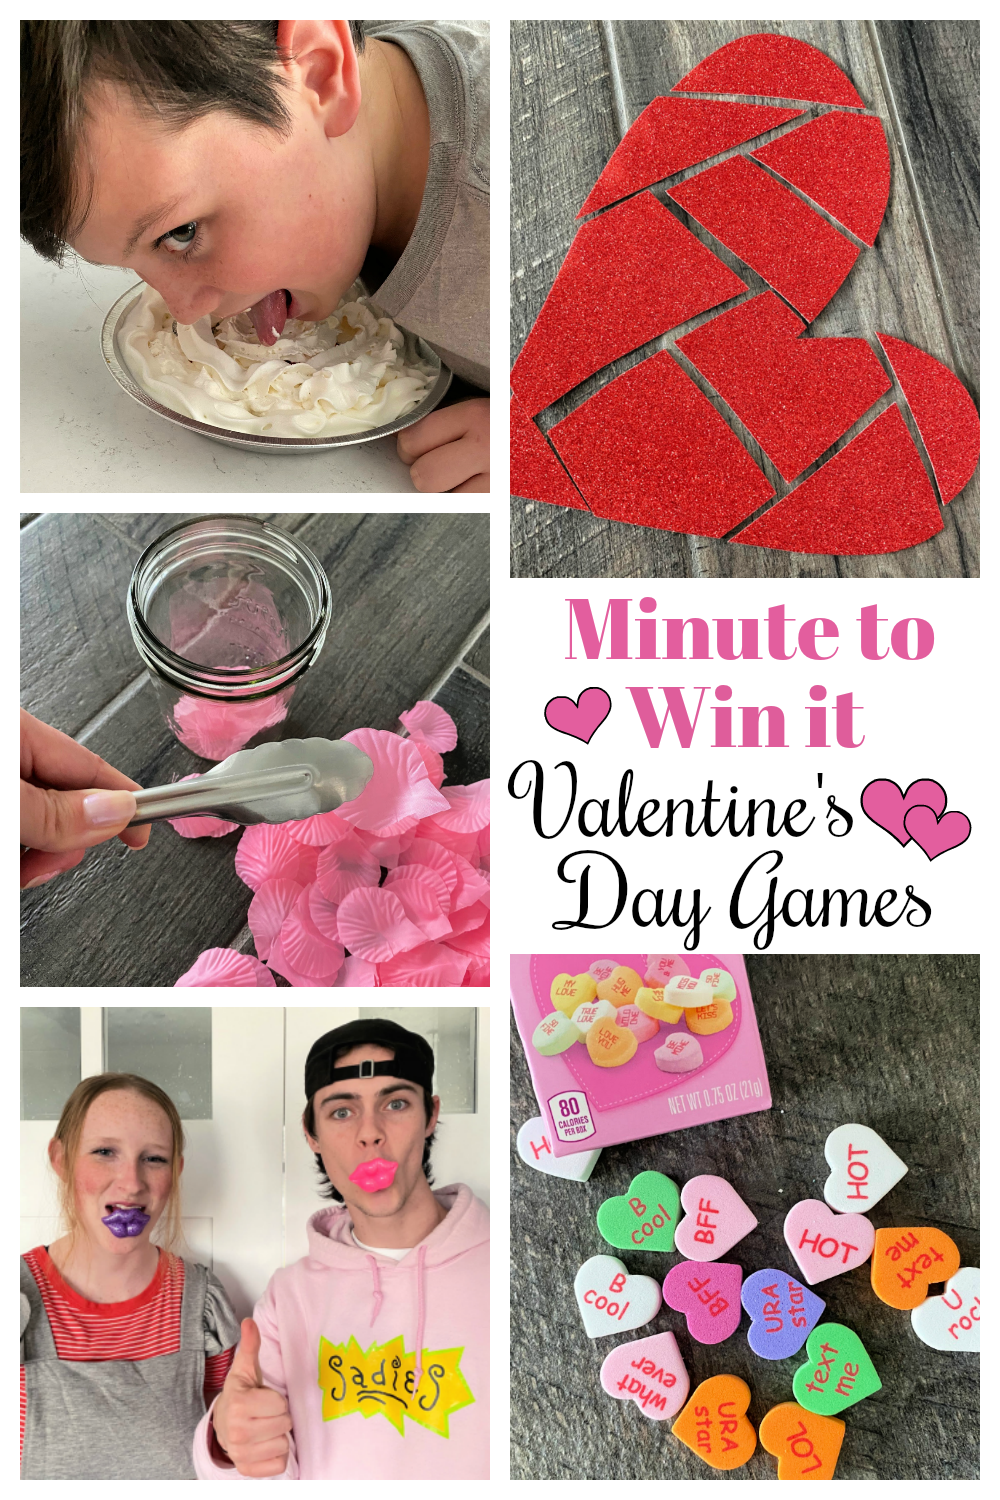 Valentines Games. These fun Minute to Win it Valentine's Day Games are perfect for your next Valentines party. Your guests will love these Valentines games! #minutetowinitgames #Valentinesdaygames #valentinesgames #minutetowinitvalentinesgames